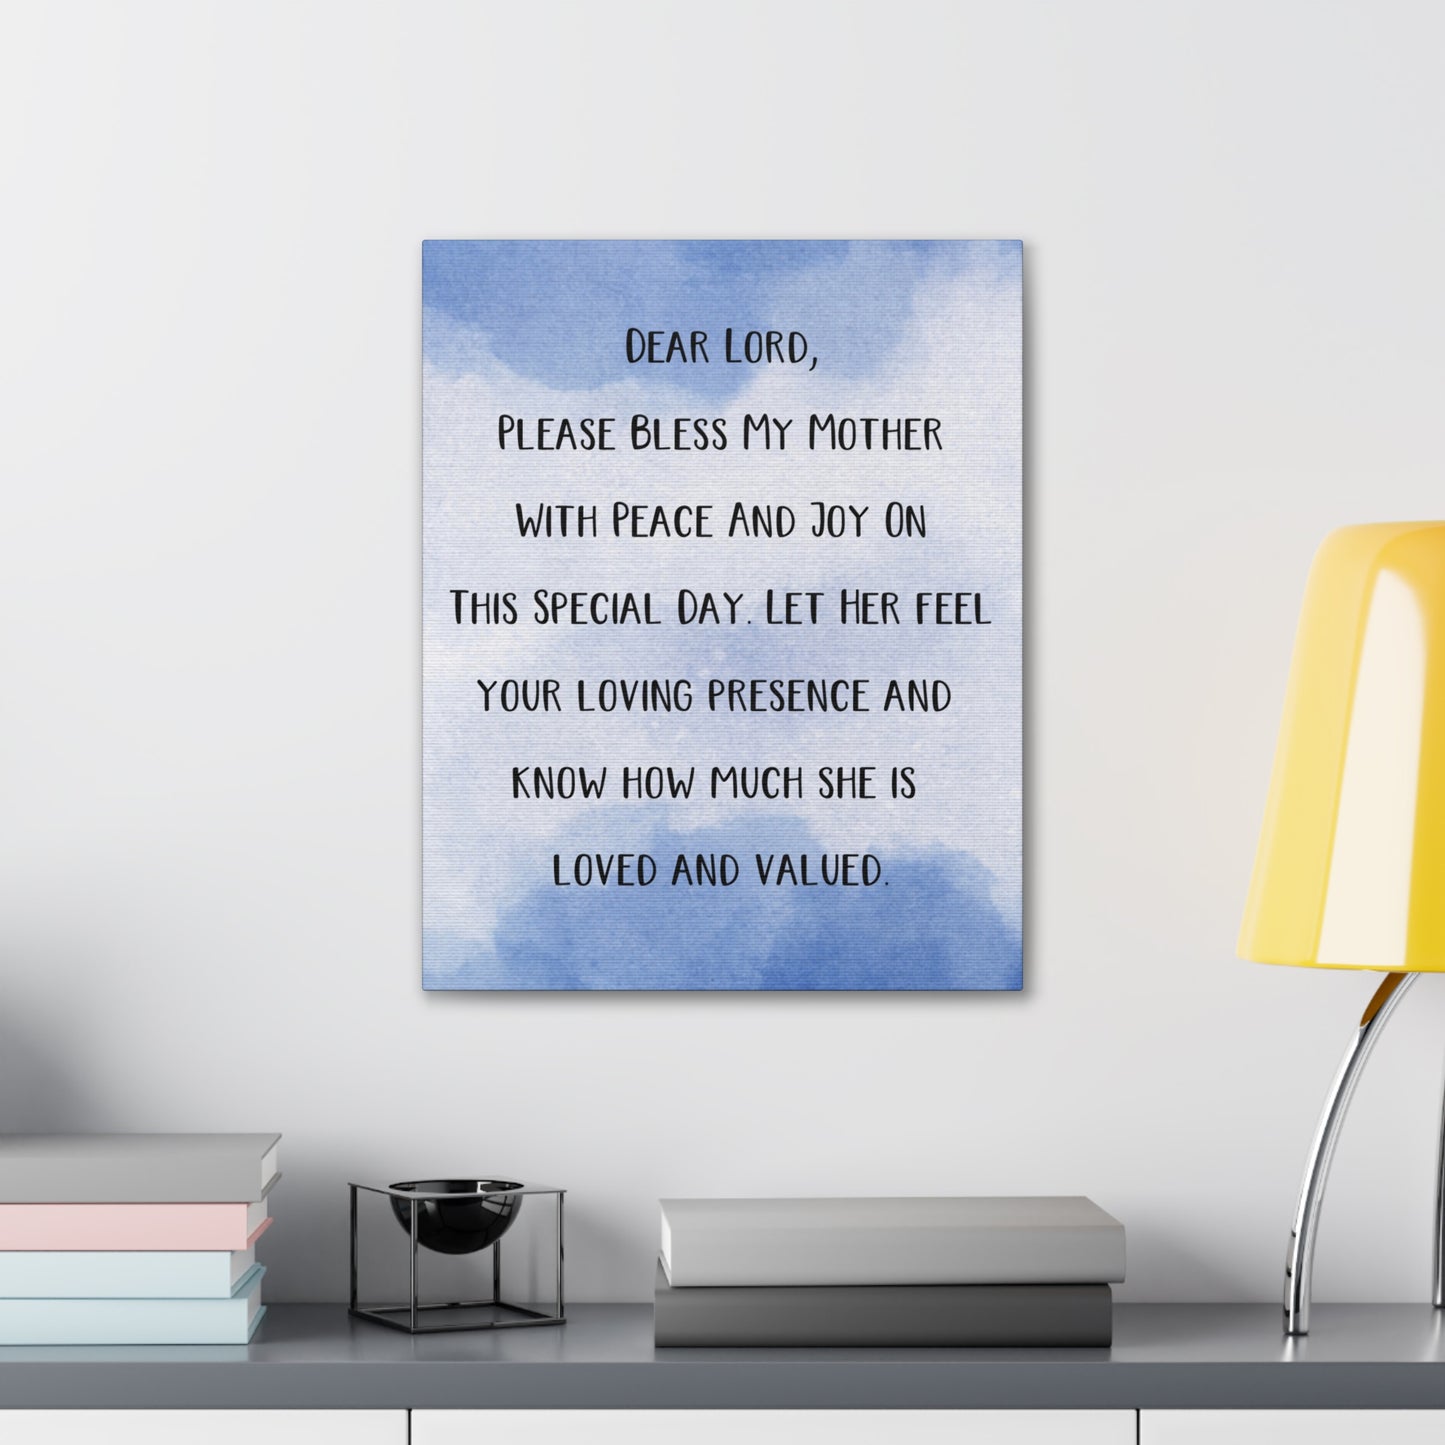 "Dear Lord, Bless My Mother" Wall Art - Weave Got Gifts - Unique Gifts You Won’t Find Anywhere Else!